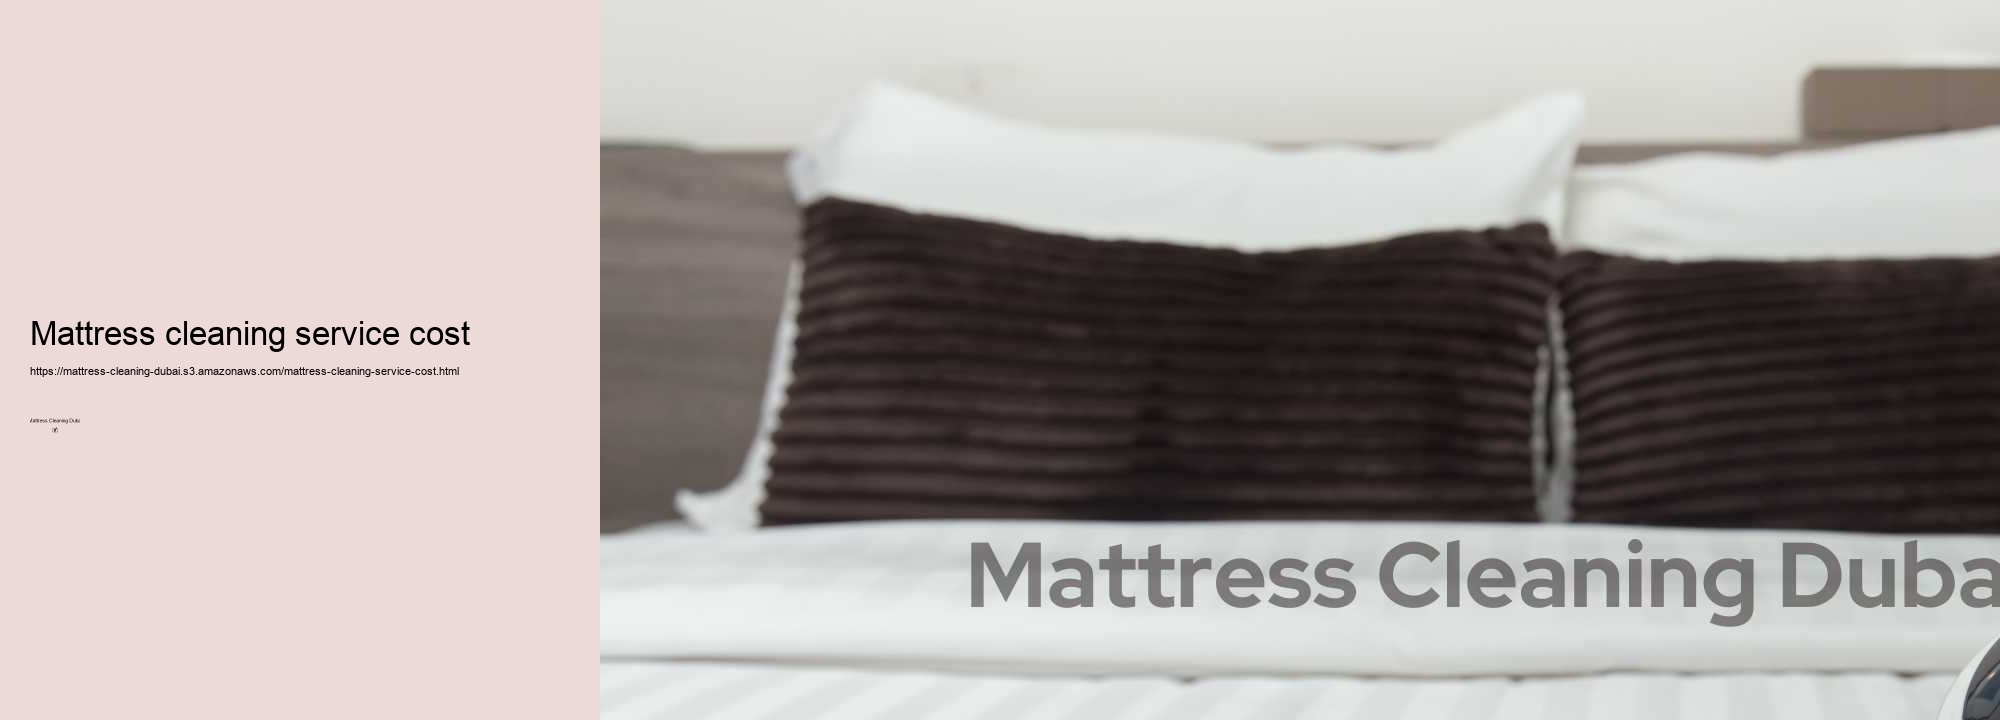 Mattress cleaning service cost